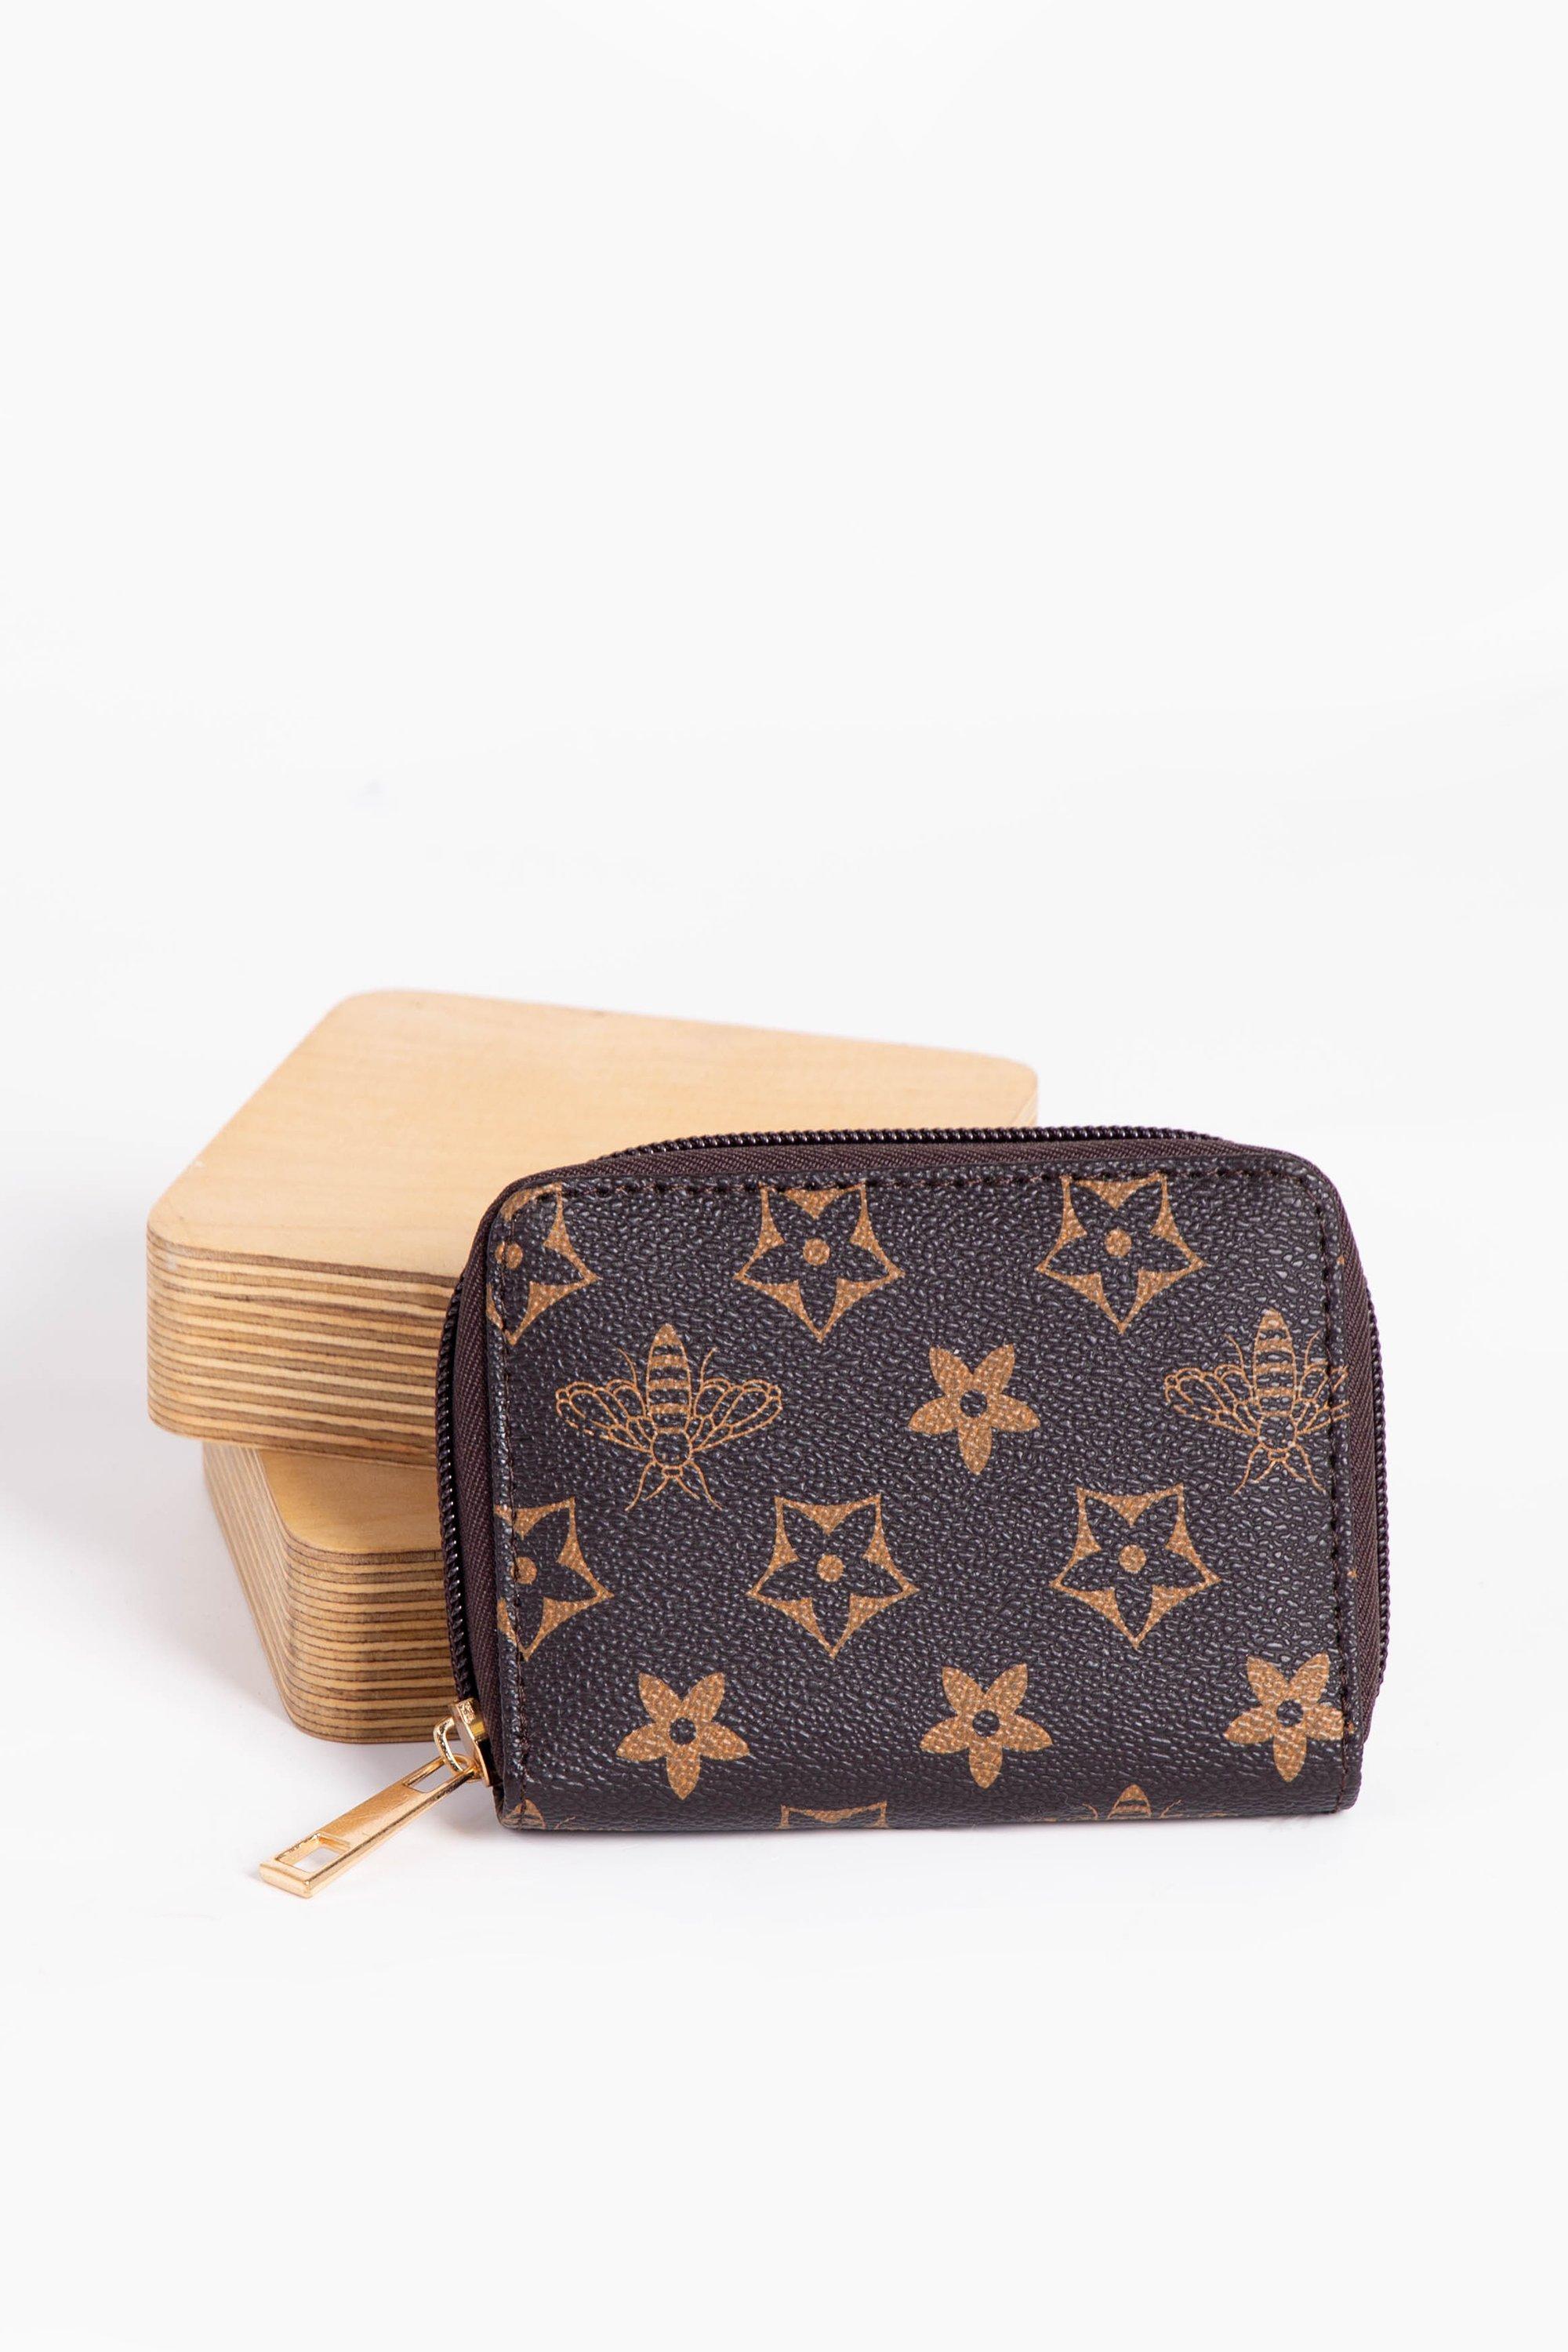 Louis Vuitton zippy coin Purse Review/ how many cards fit inside